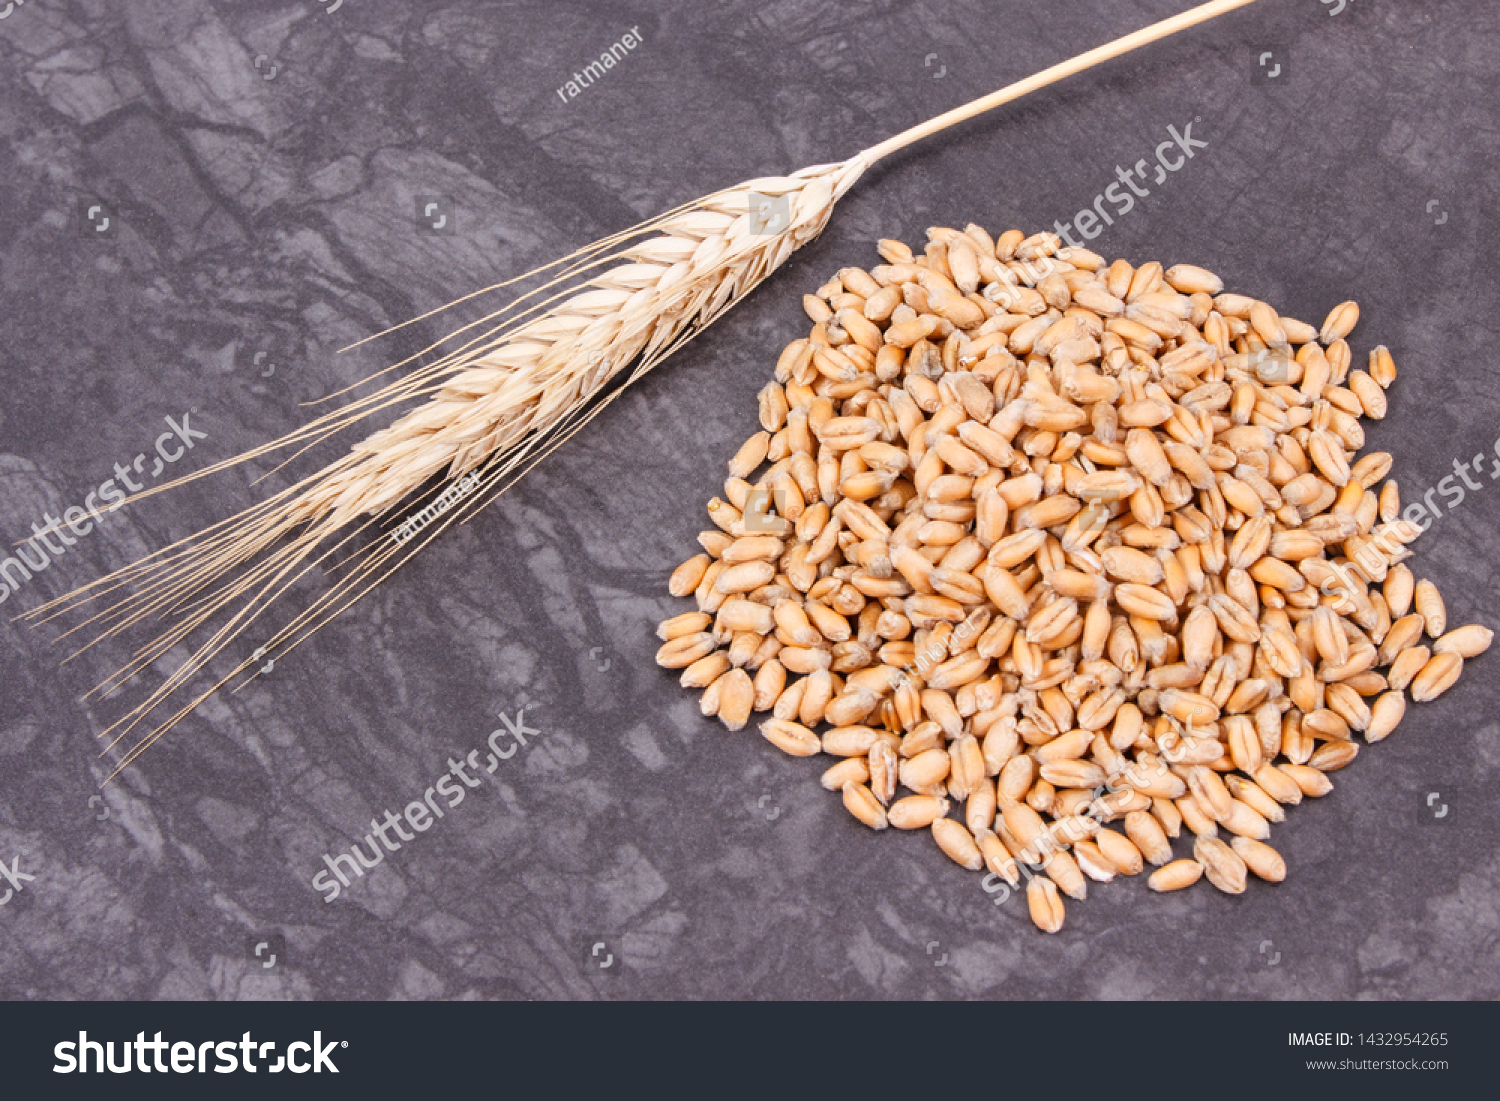 Heap of rye or wheat grains and ears of cereal on dark background #1432954265